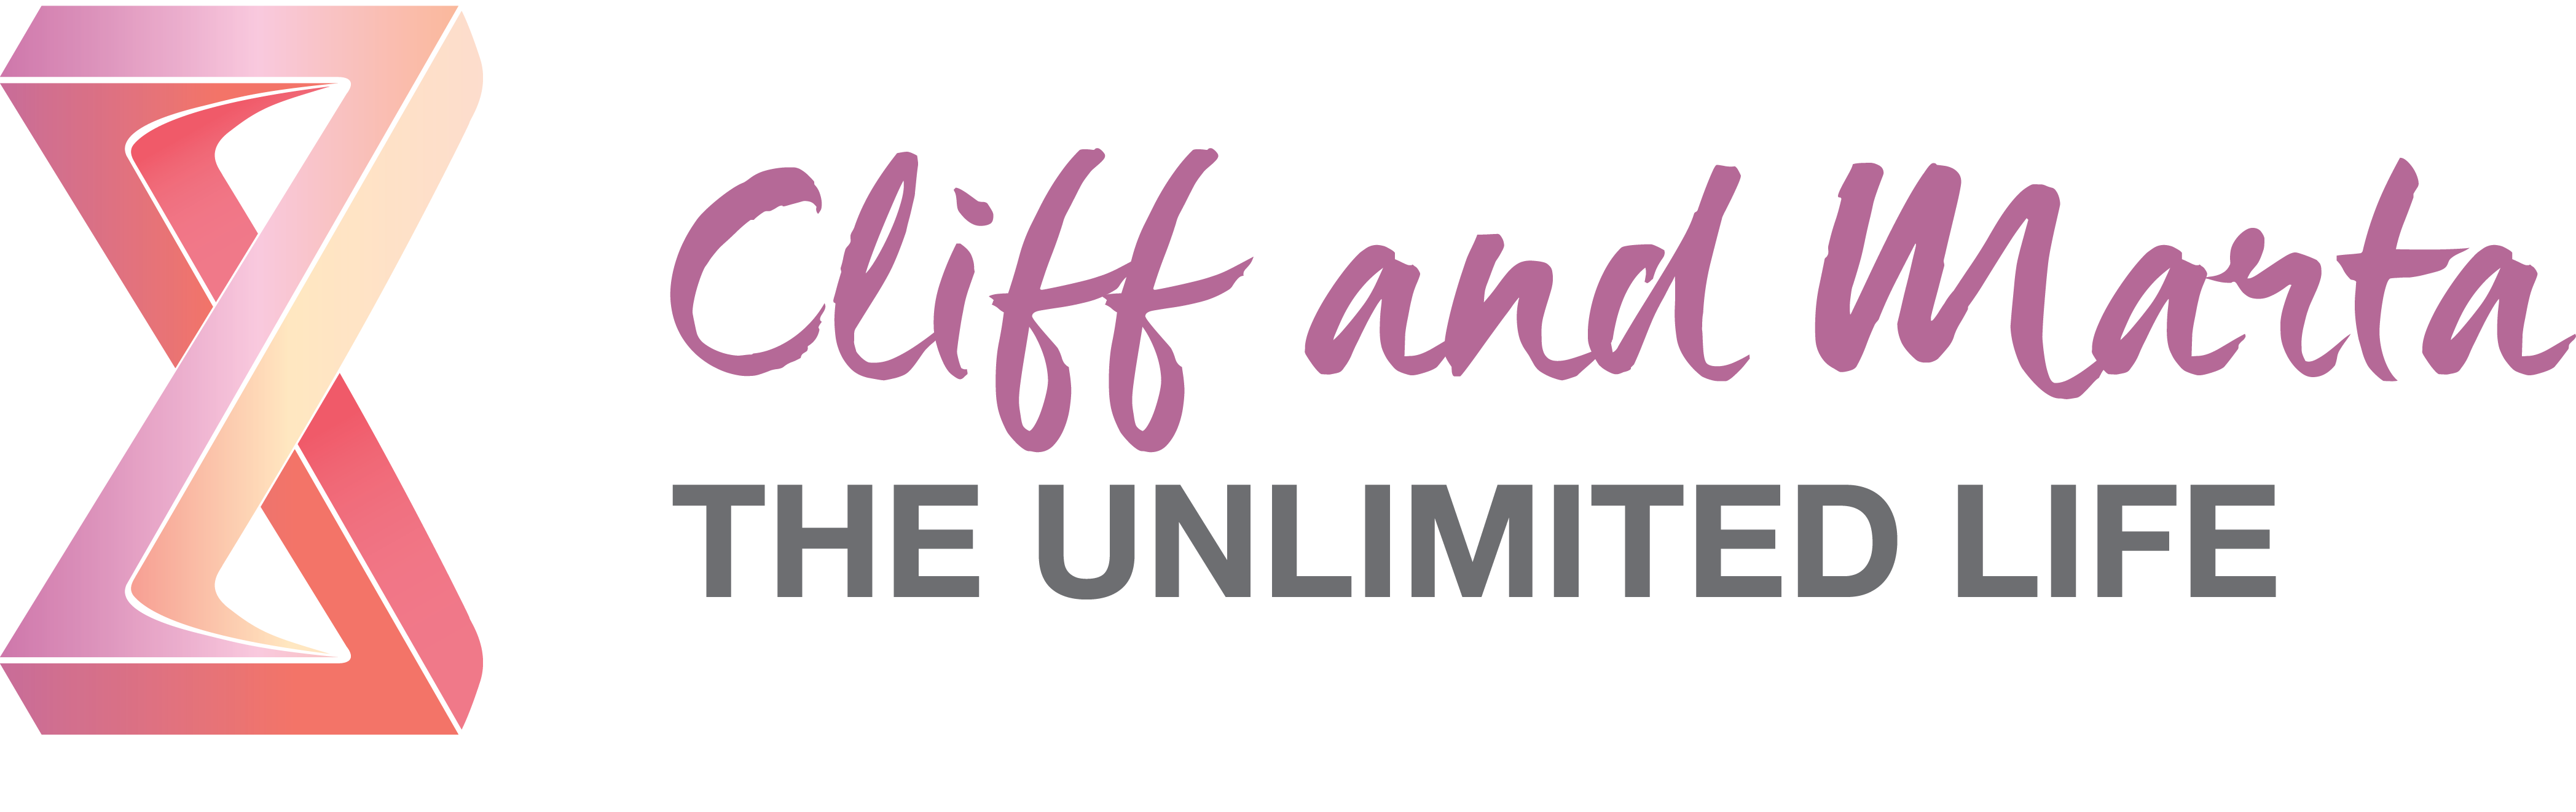 Unlimited Life LogoText